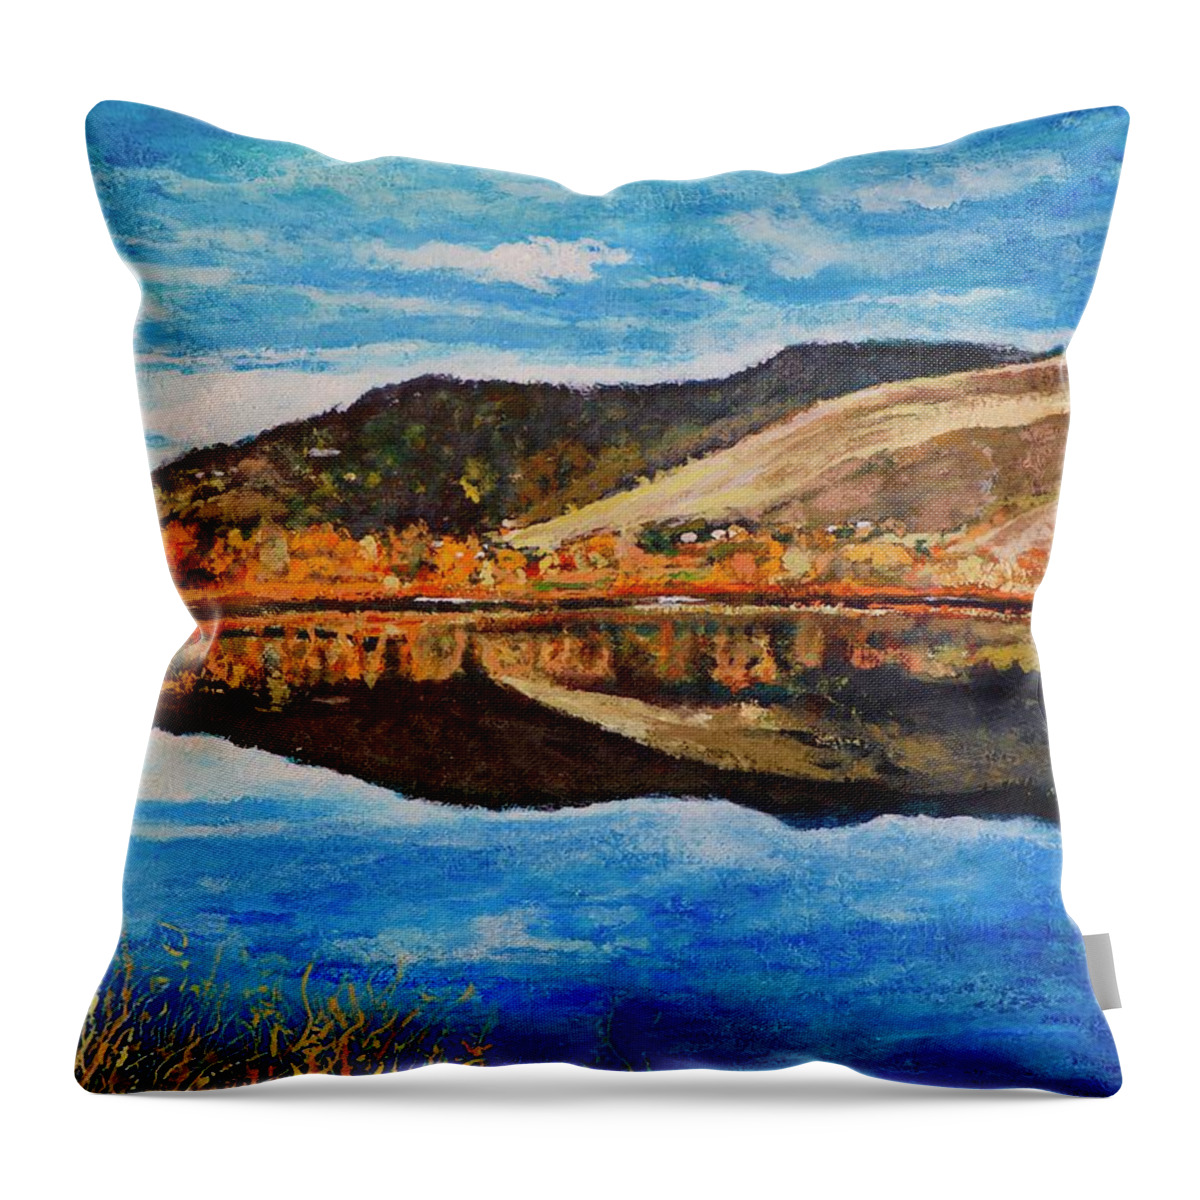 Boulder Throw Pillow featuring the painting Wonderland Lake by Tom Roderick